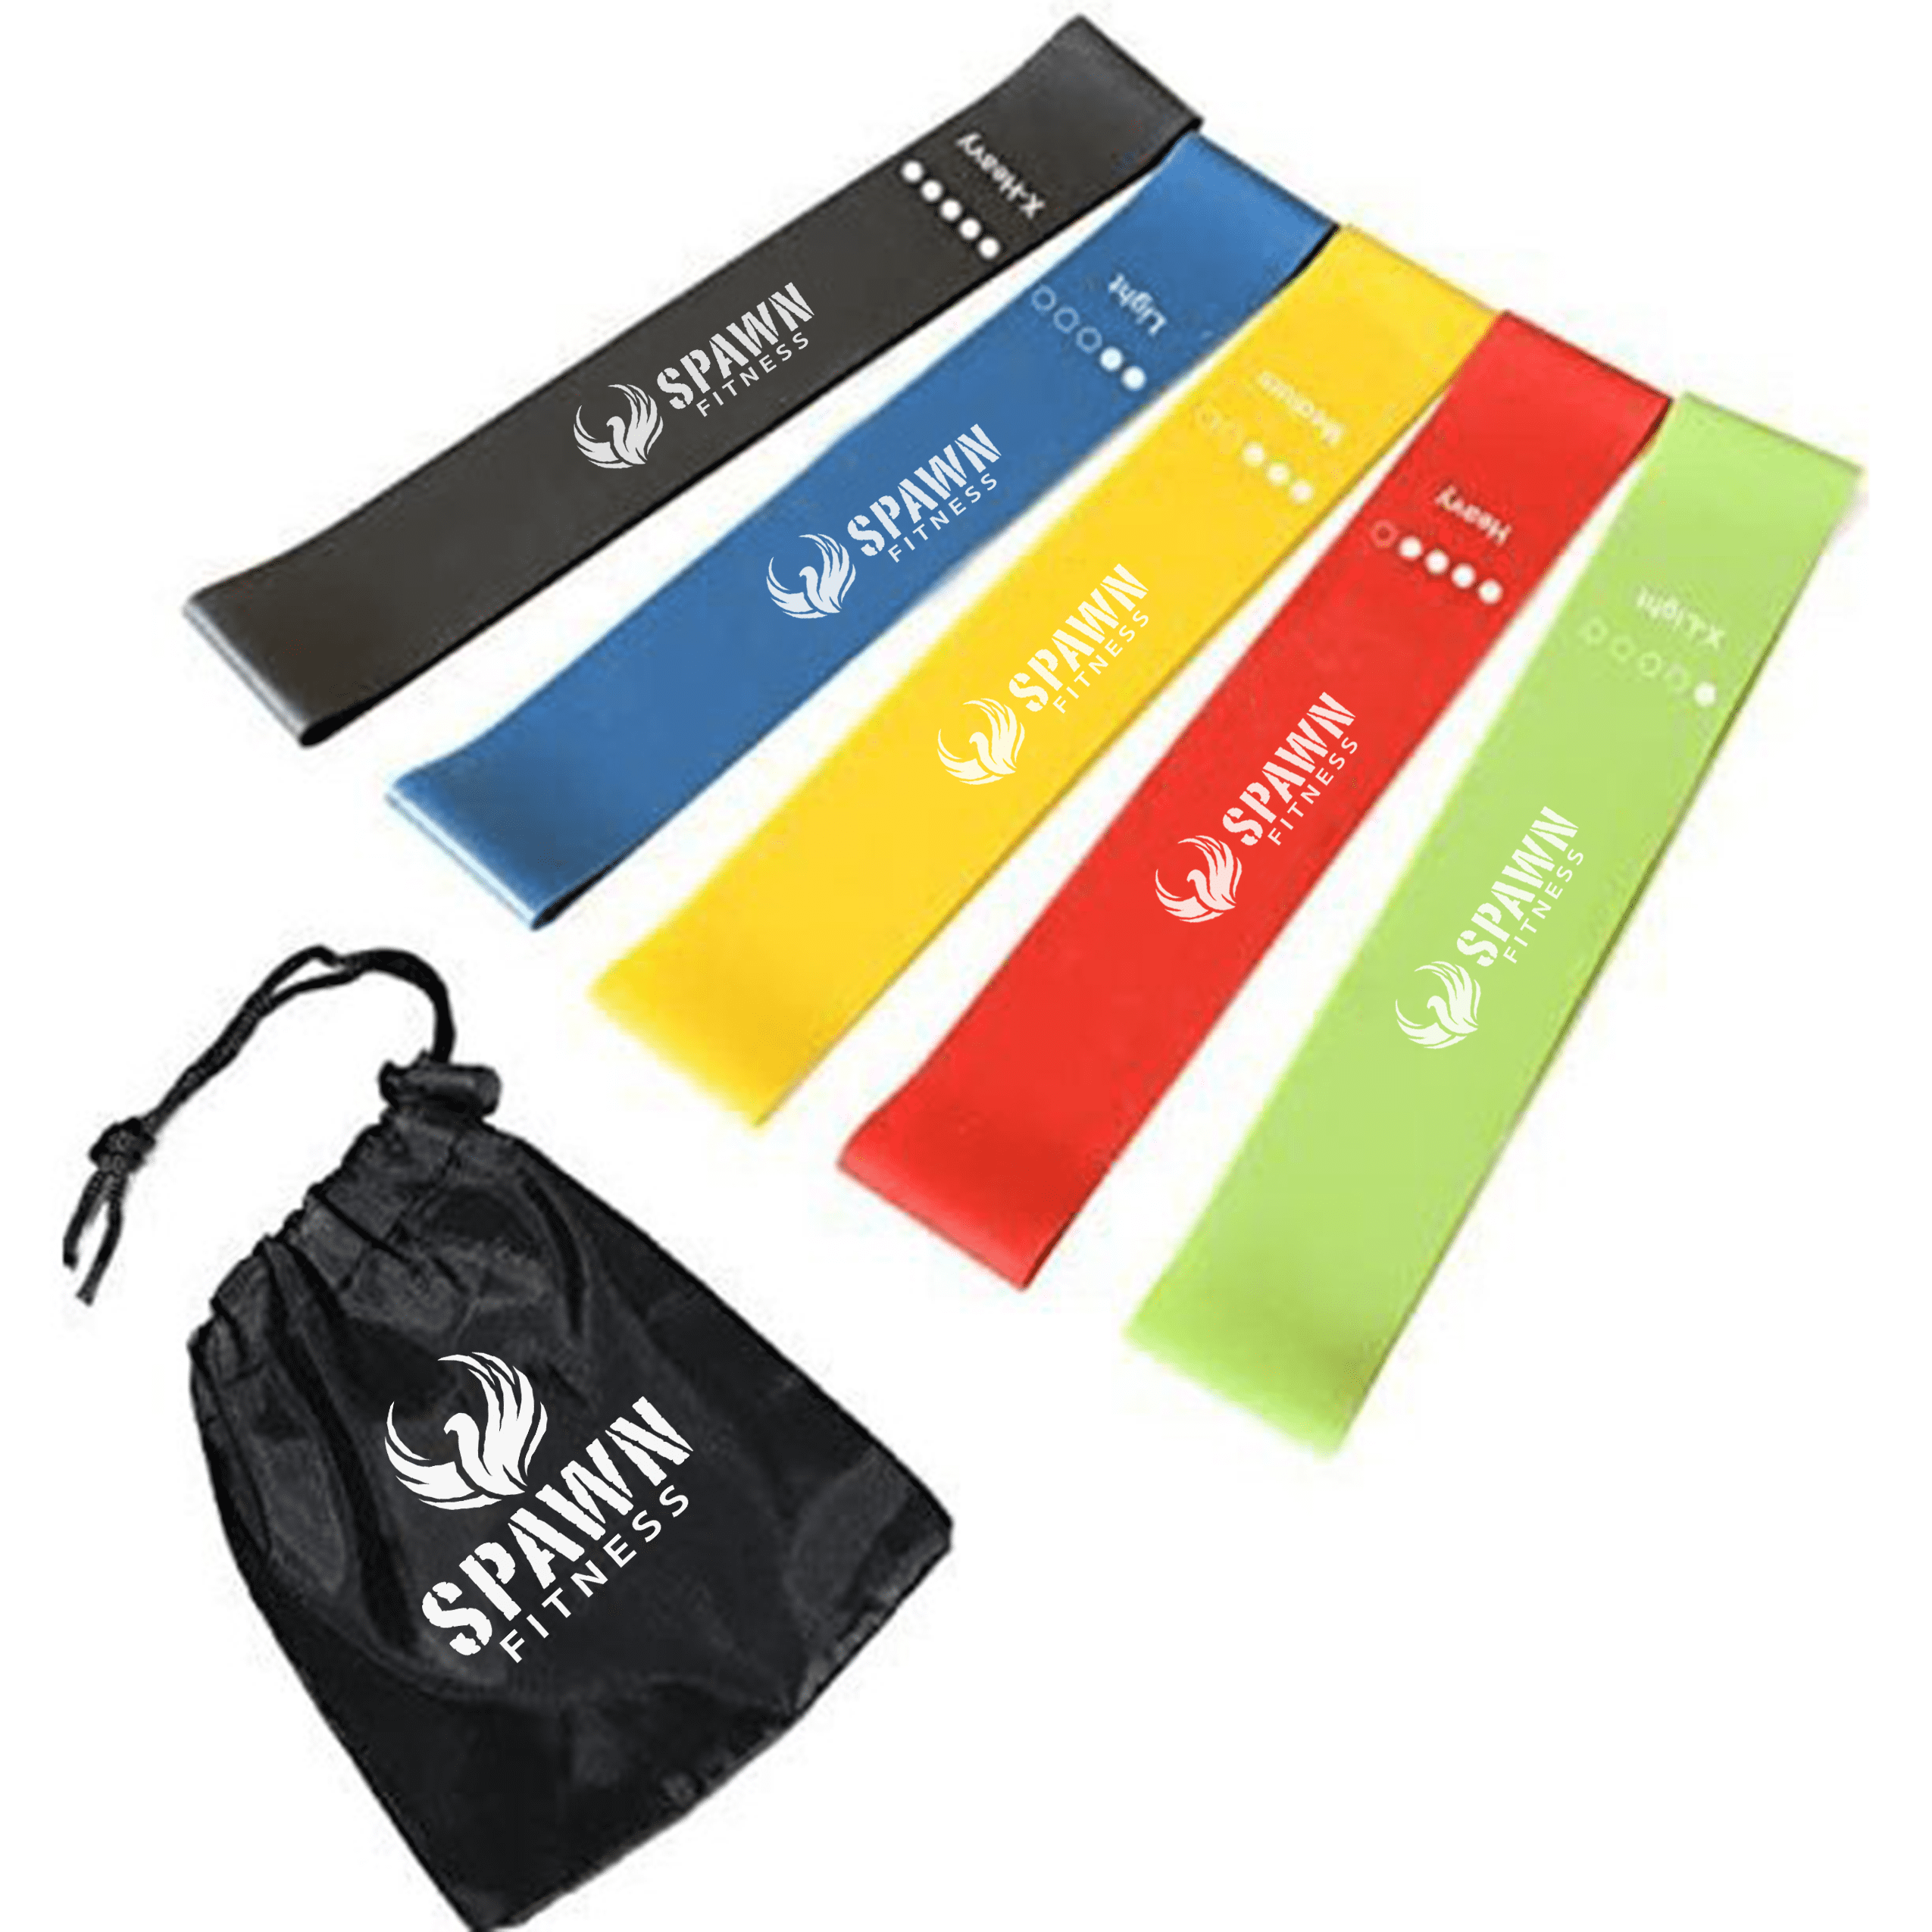 Details about   Spawn Fitness Resistance Bands Exercise Bands for Workout Butt Band Set of 3